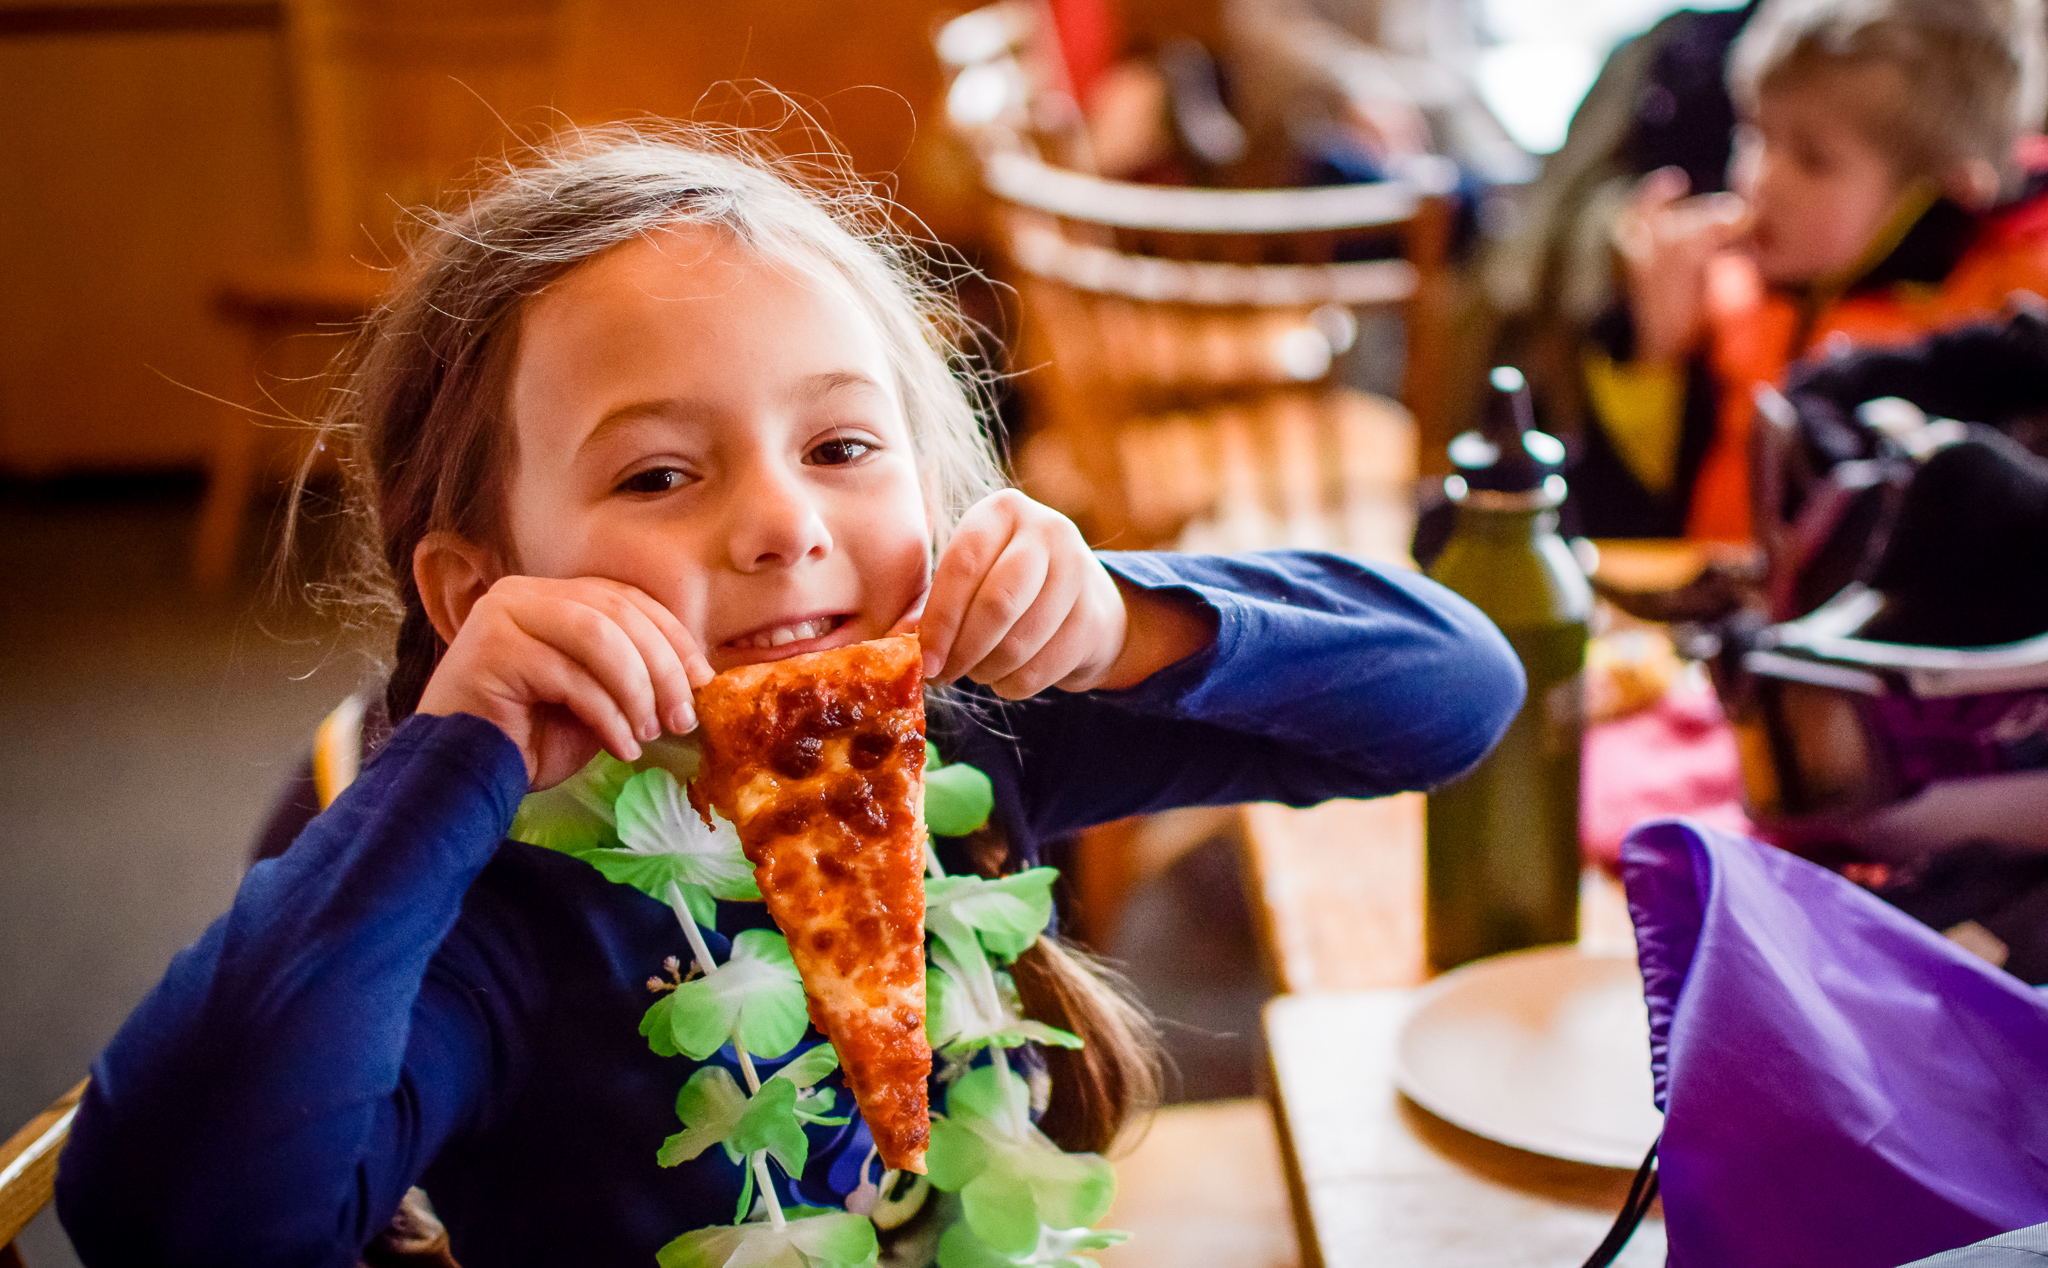 Smiling child with pizza slice